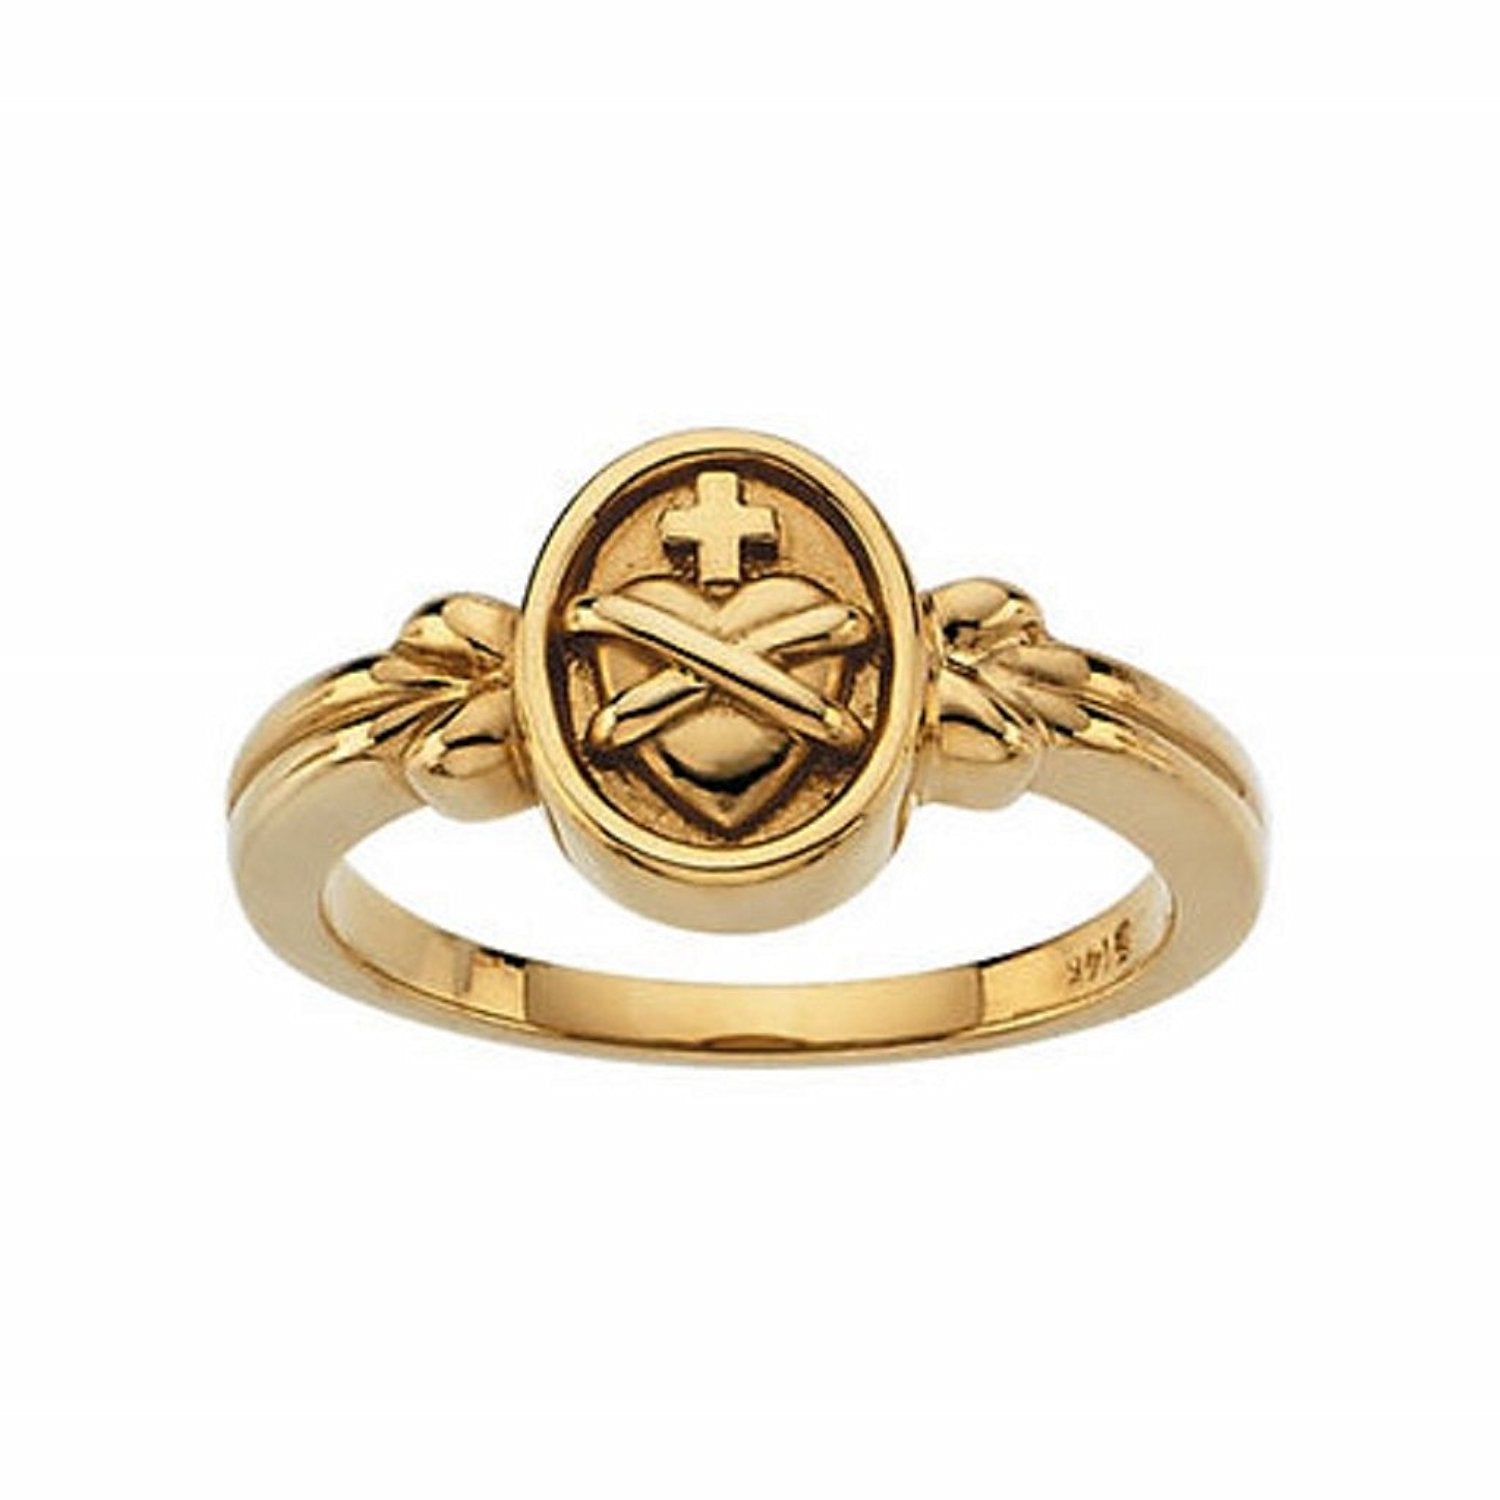 Buy Jude Jewelers Stainless Steel Christian Jesus Cross Ring (Gold, 13)  Online at Lowest Price Ever in India | Check Reviews & Ratings - Shop The  World